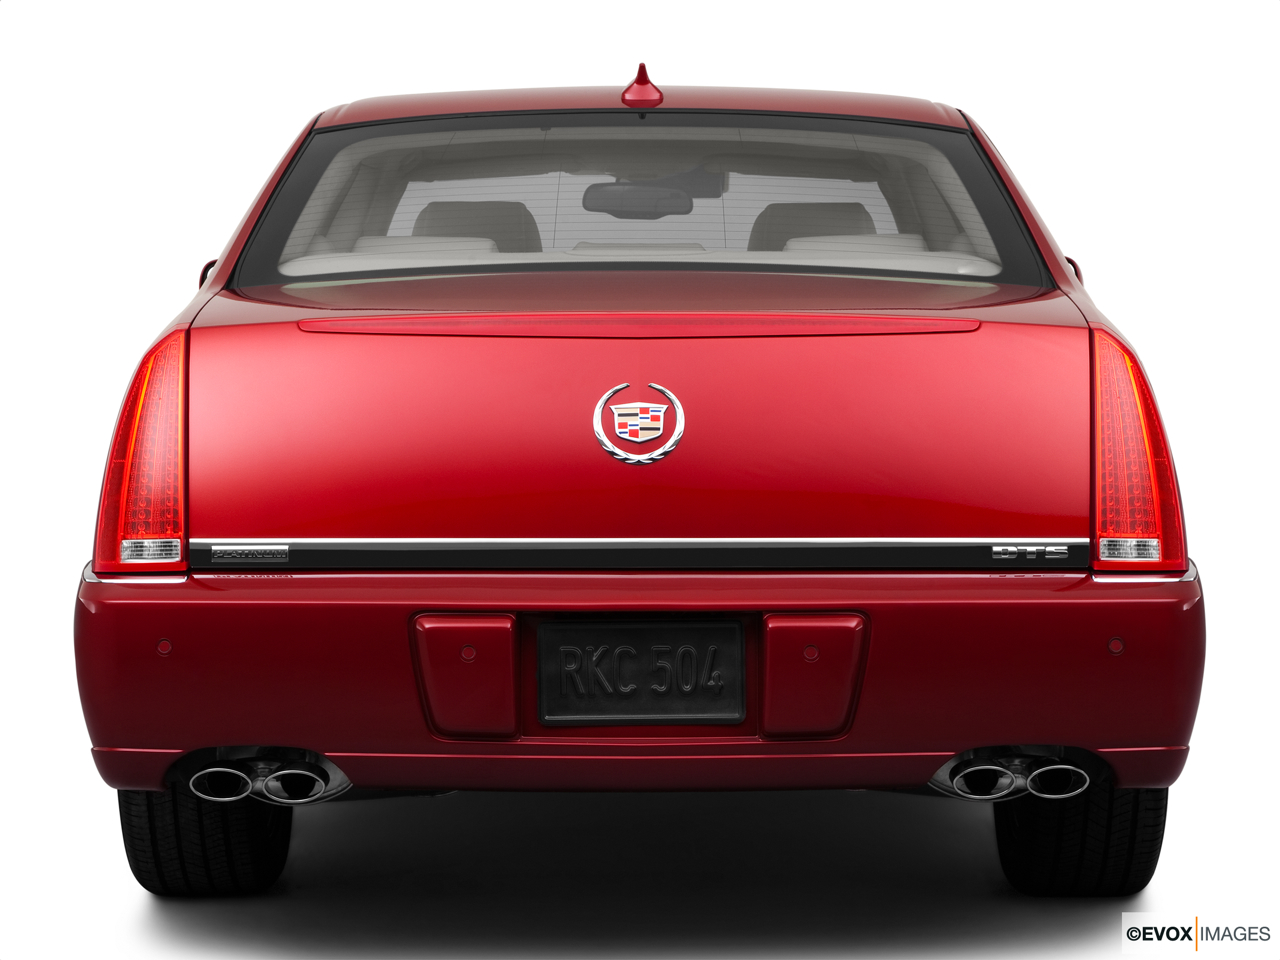 2011 Cadillac DTS Platinum Low/wide rear. 